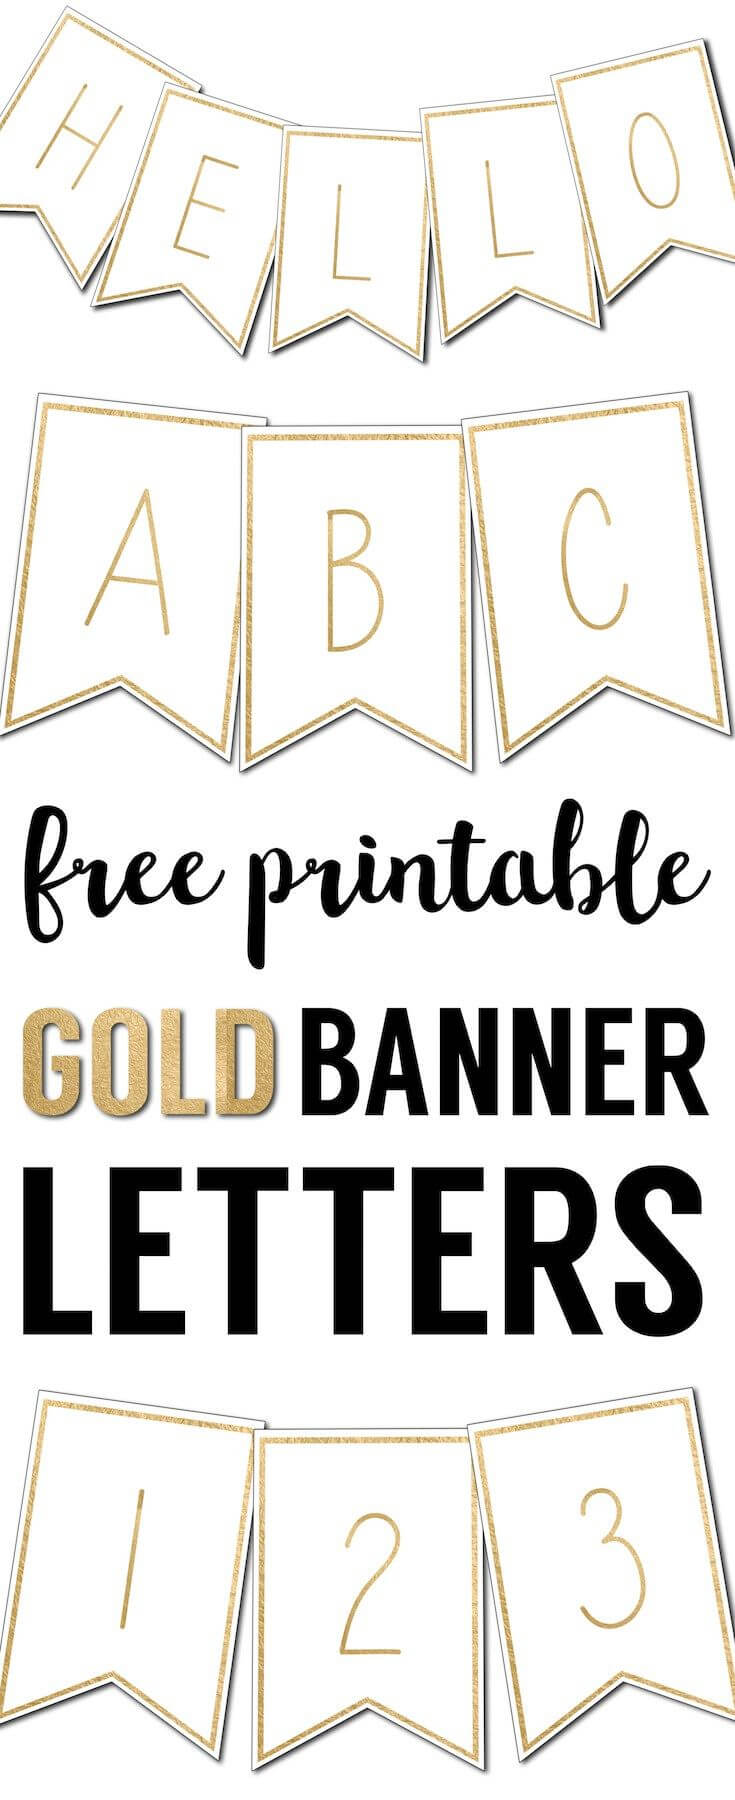 Free Printable Banner Letters Templates | Printable Banner For Letter Templates For Banners